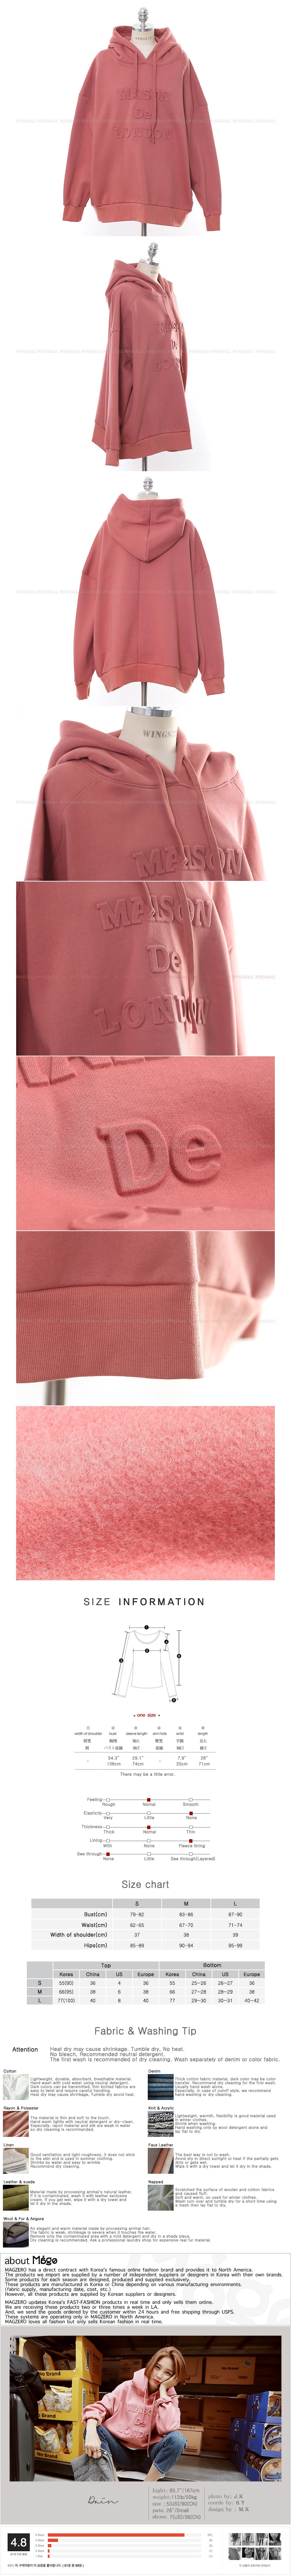 [Limited Quantity Sale] Embossed Letters Oversized Fleece Hoodie Sweatshirt Pink One Size(Free)